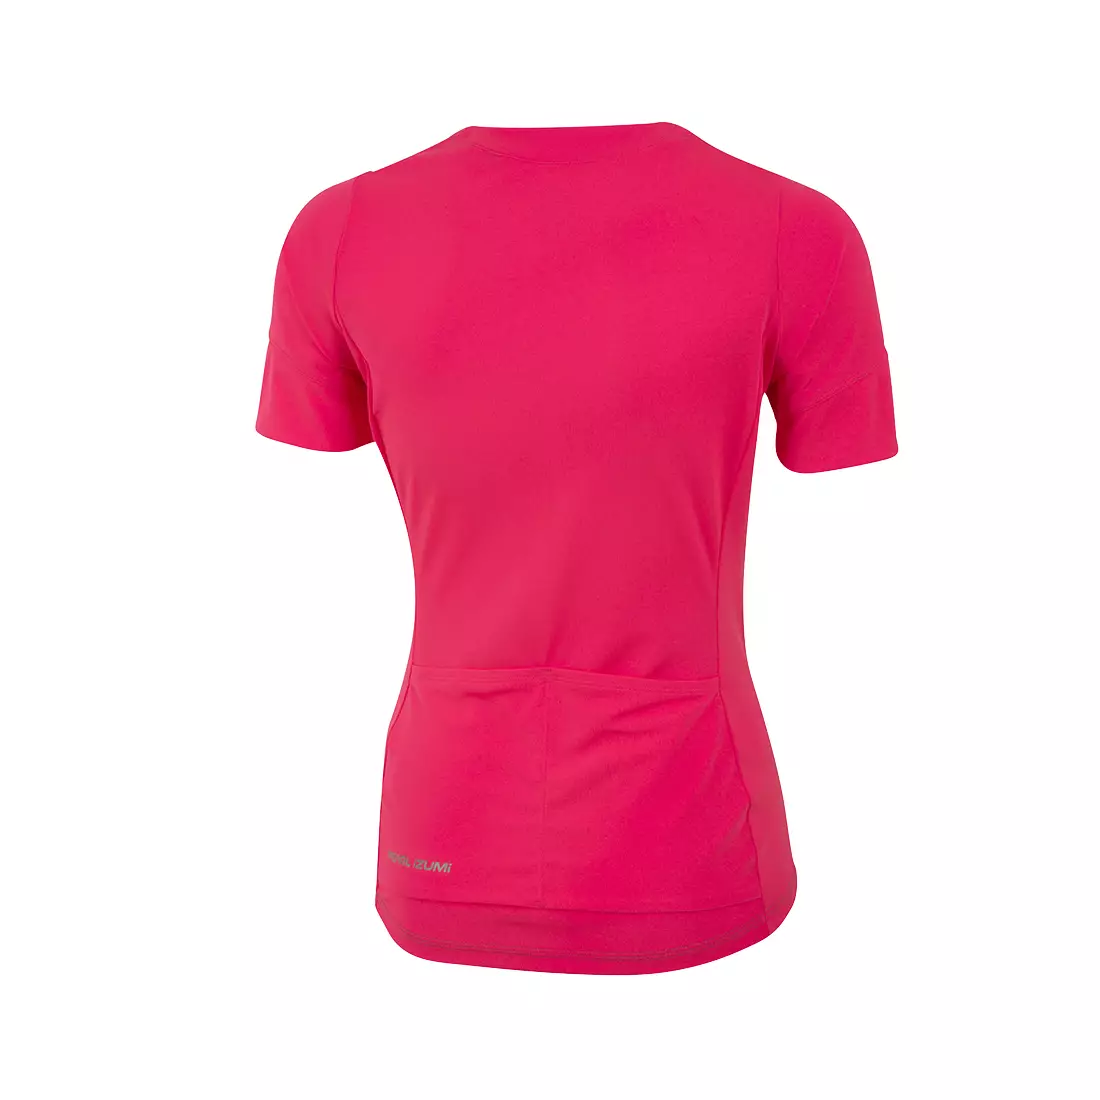 PEARL IZUMI women's cycling jersey Select 11221703-5IW Screaming Pink Whirl